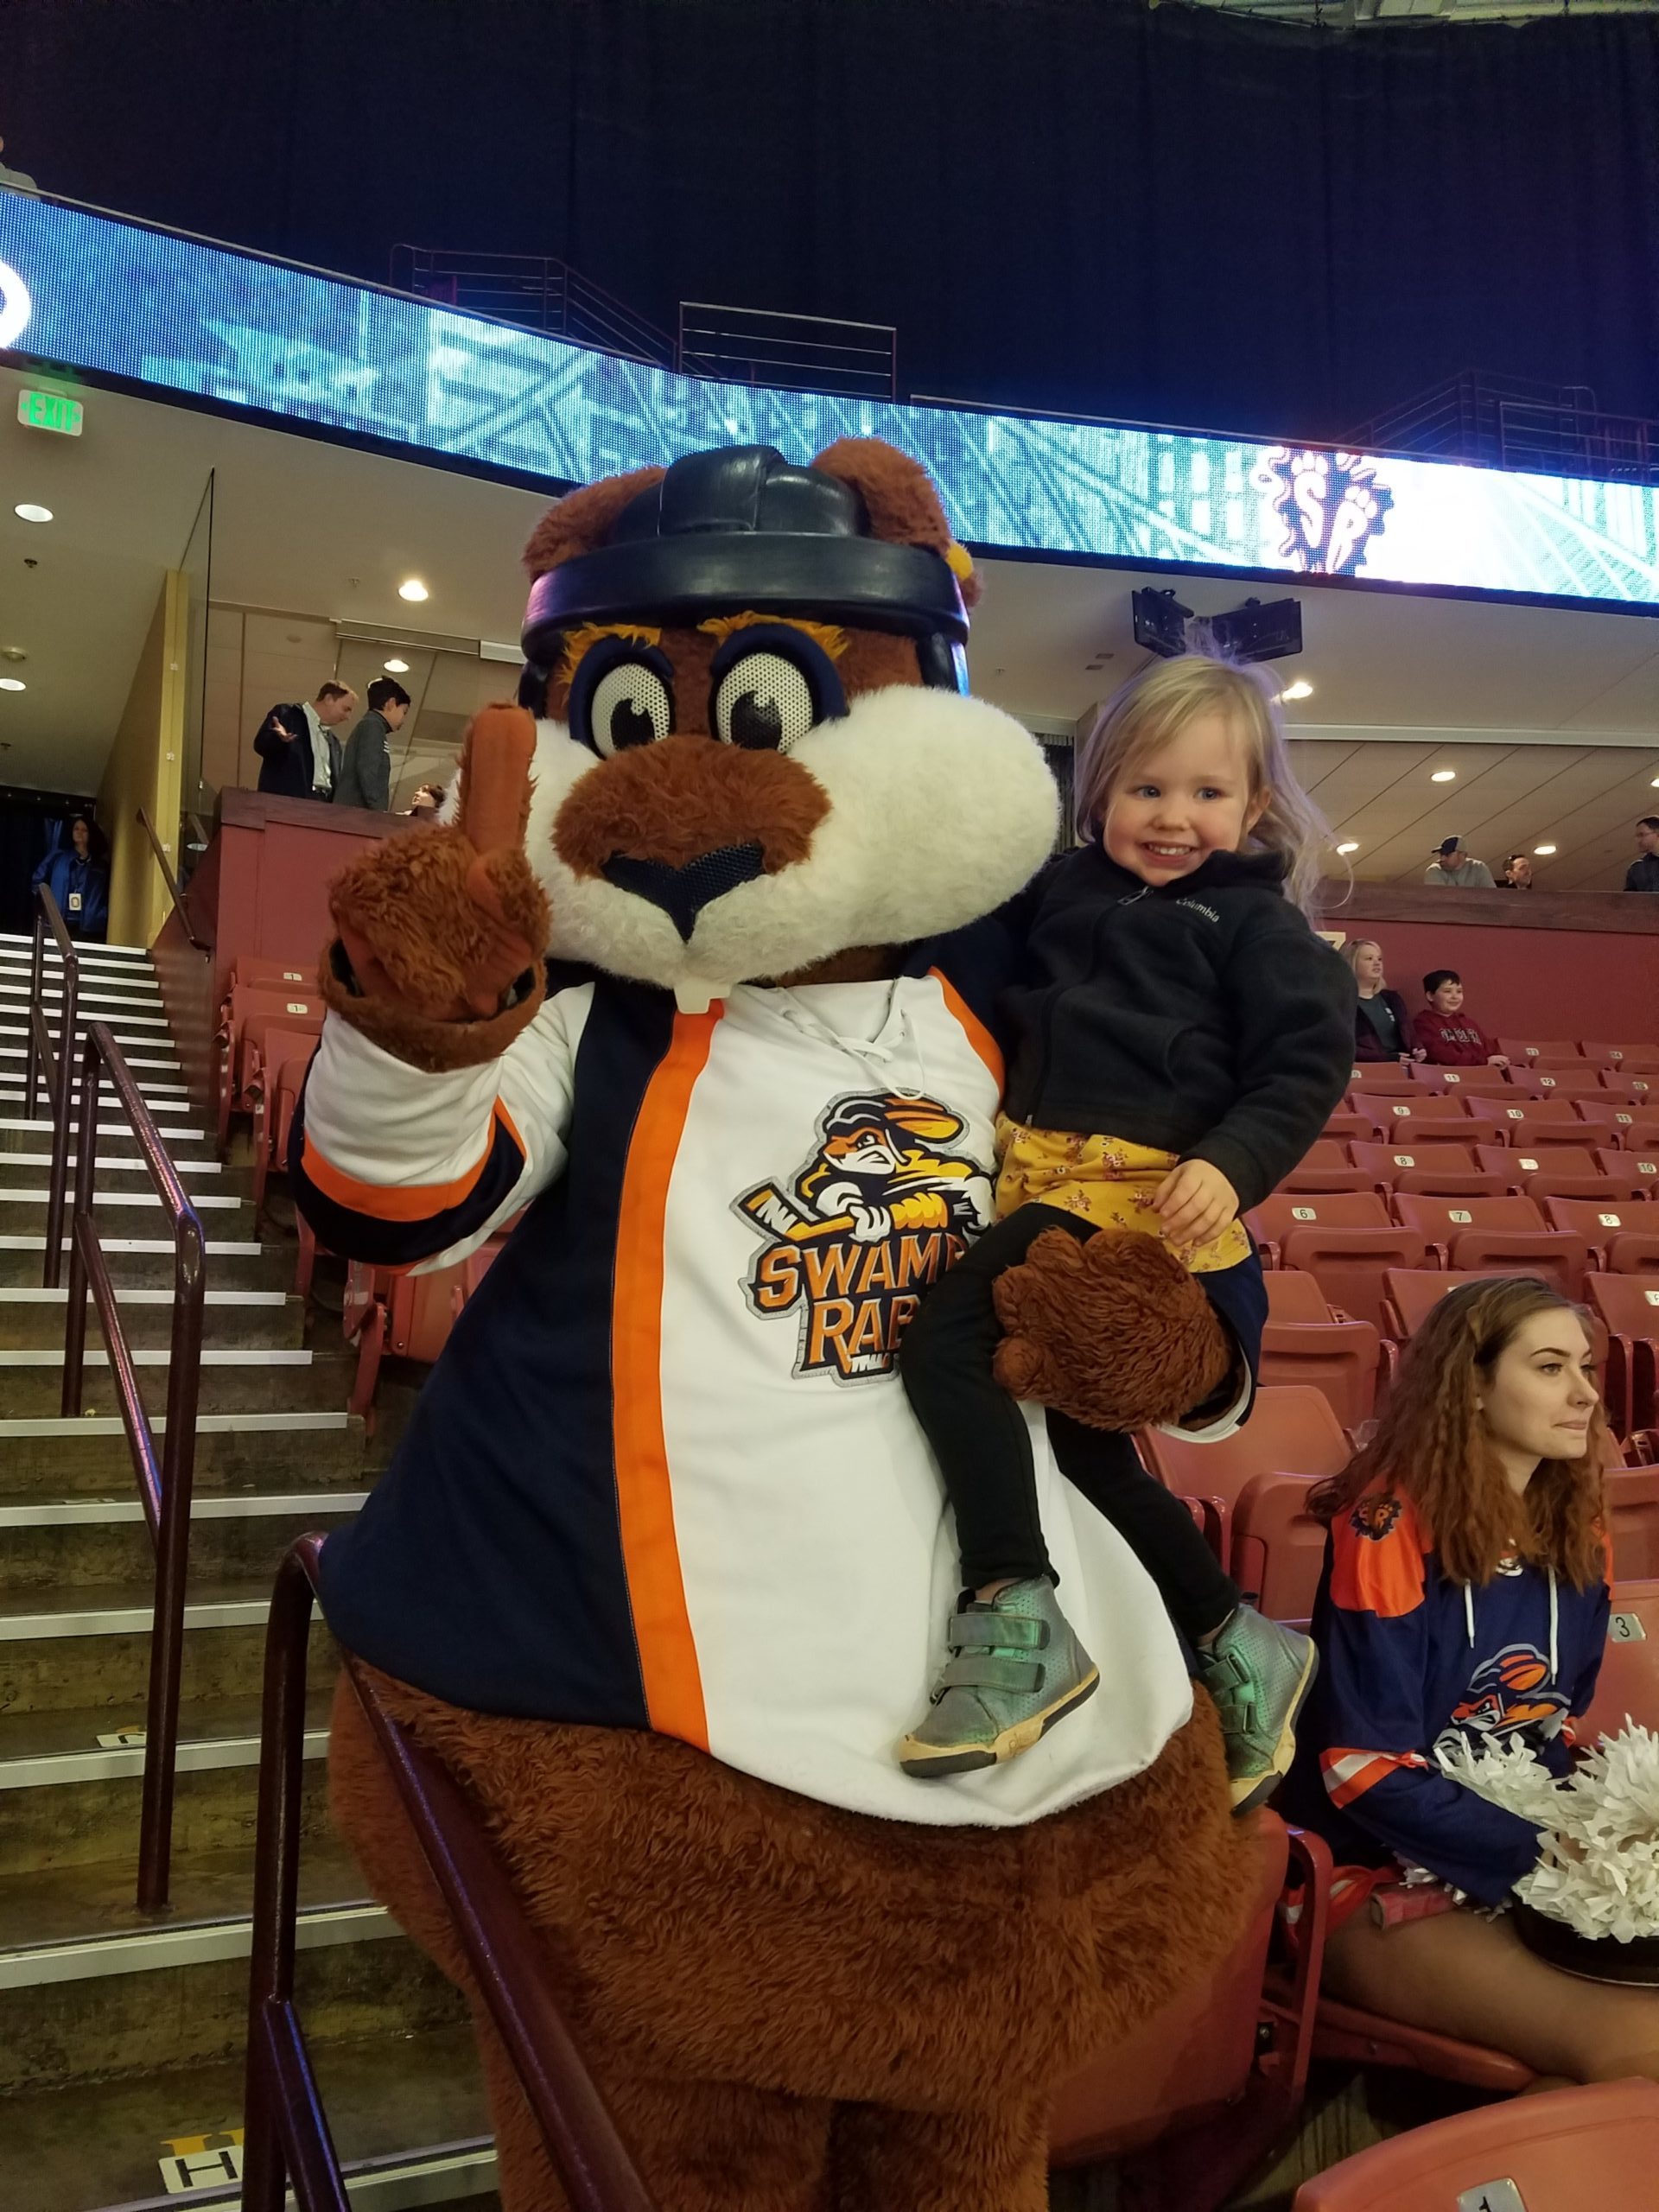 Young girl posing with Swamp Rabbit mascot